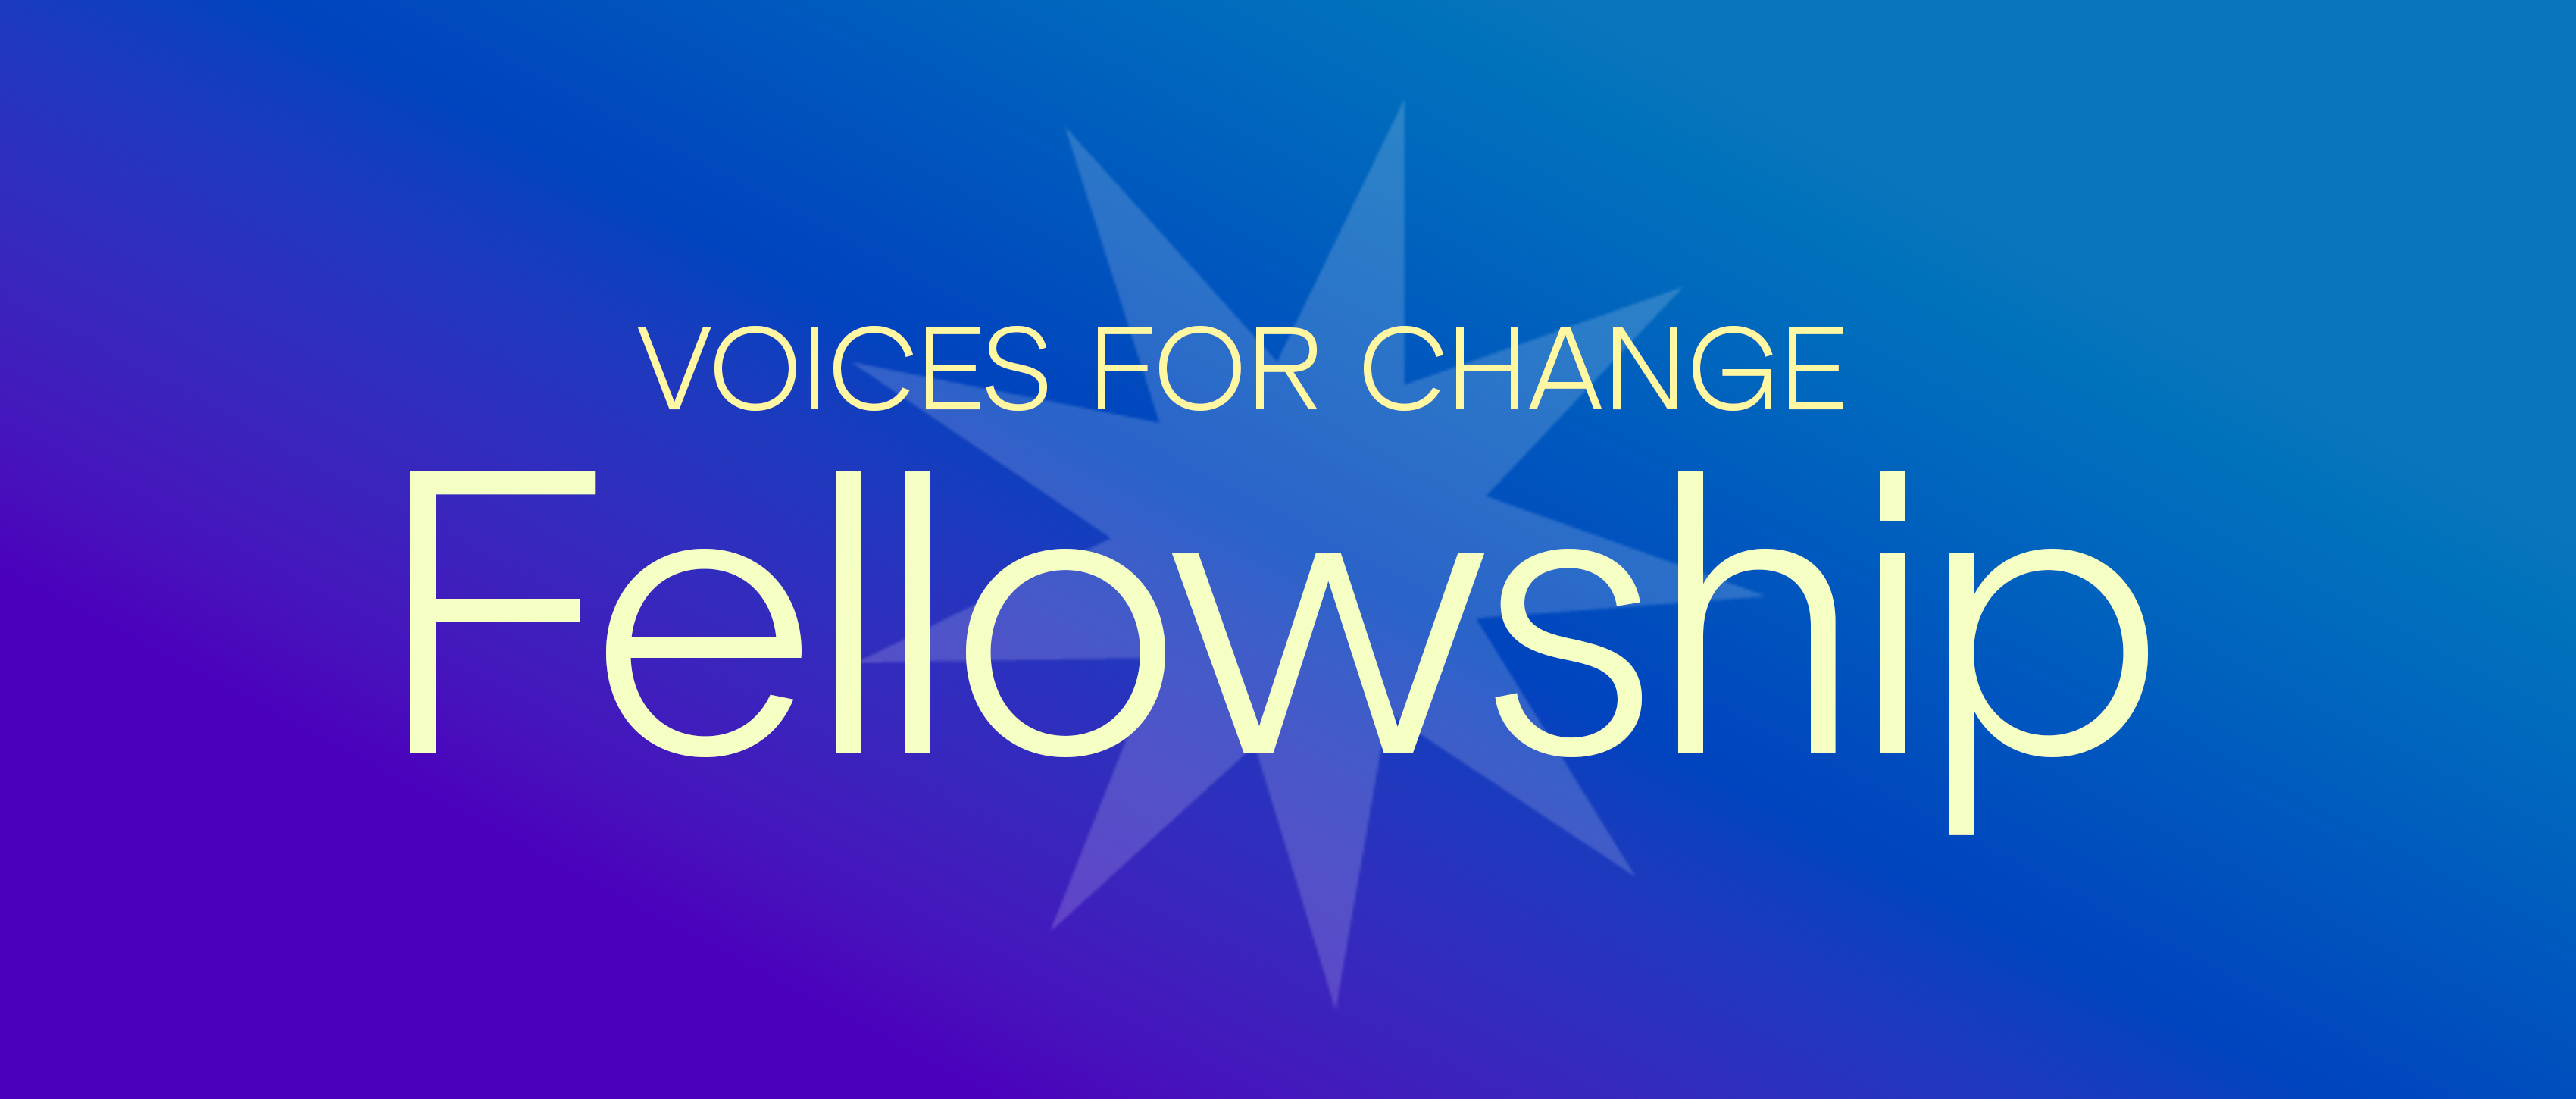 Voices for Change Fellowship